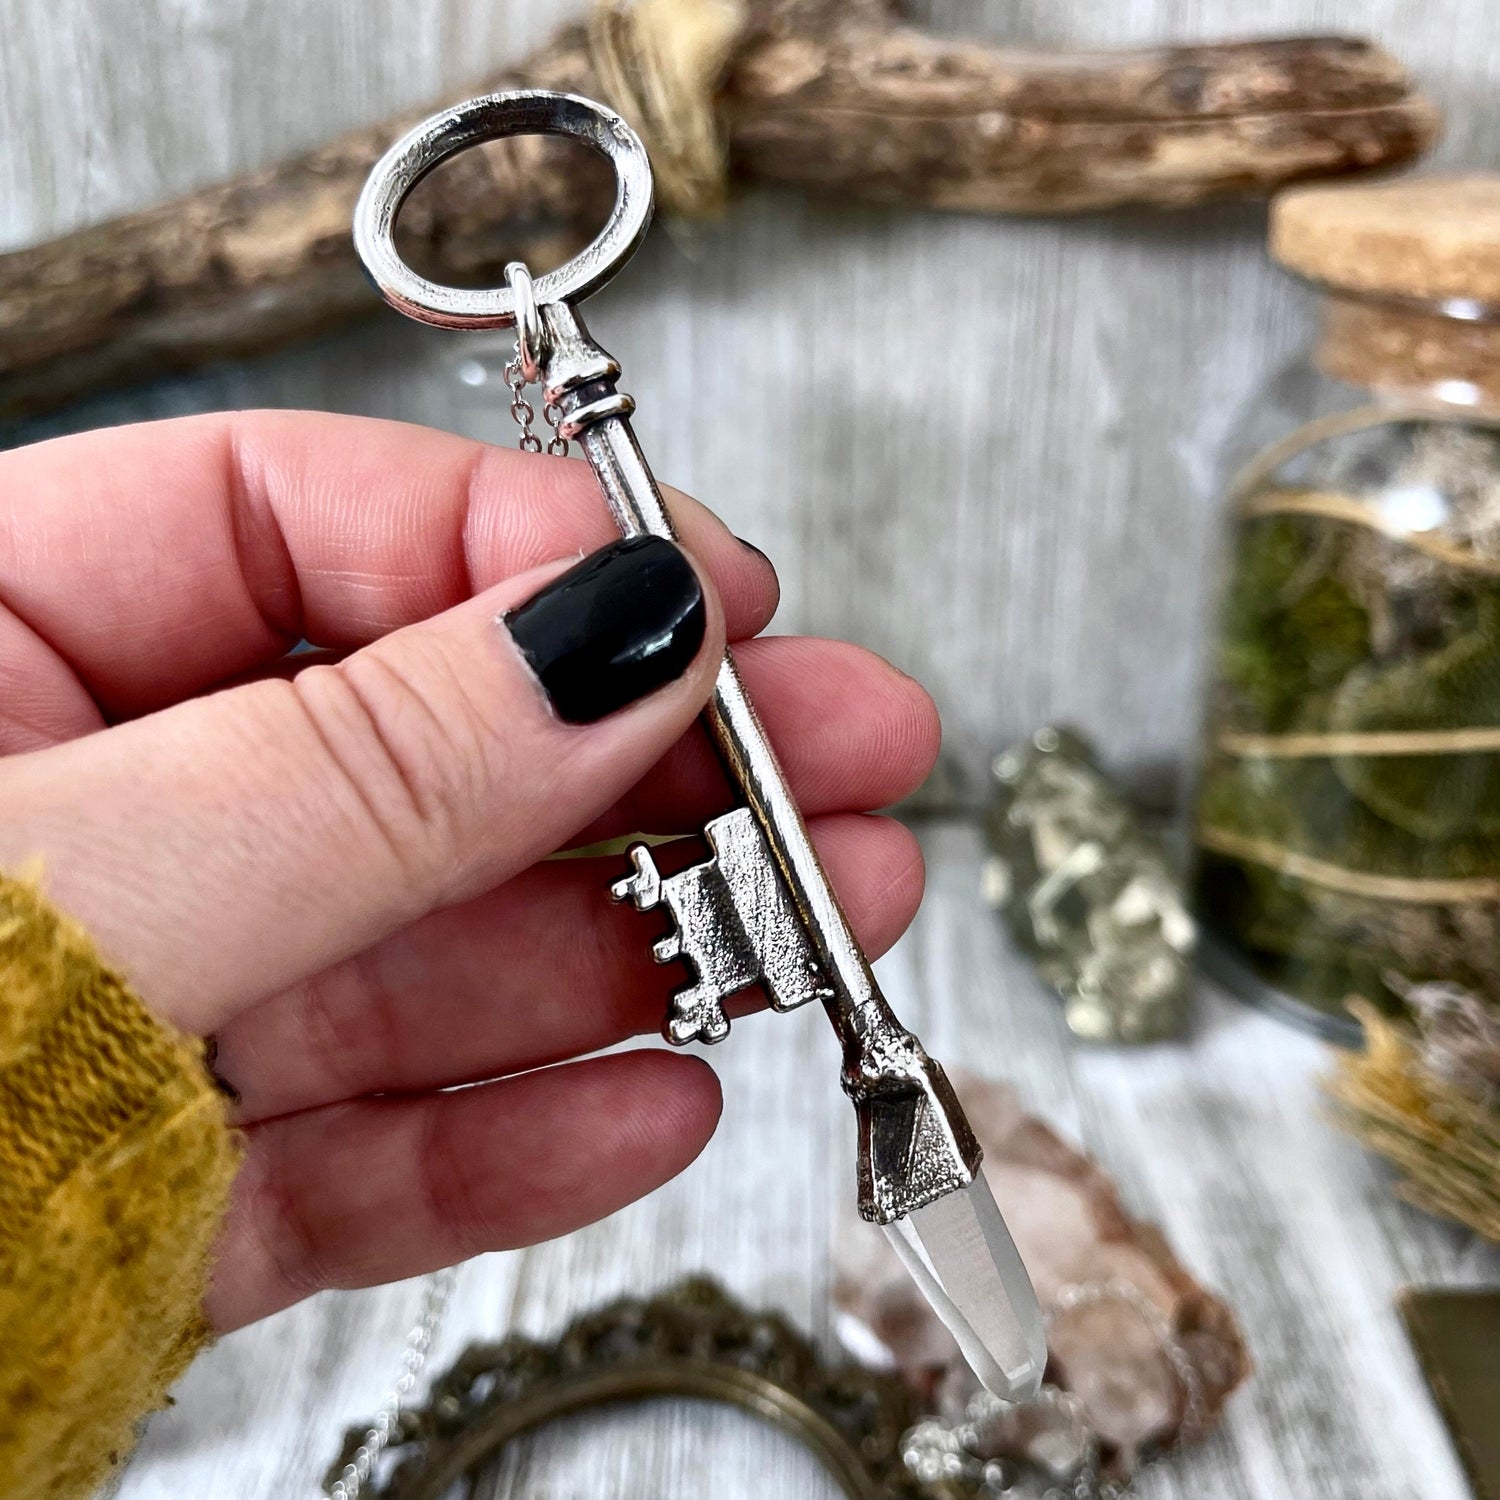 Raw Clear Quartz Crystal Vintage Skeleton Key Necklace Pendant in Fine Silver / Foxlark Collection - One of a Kind